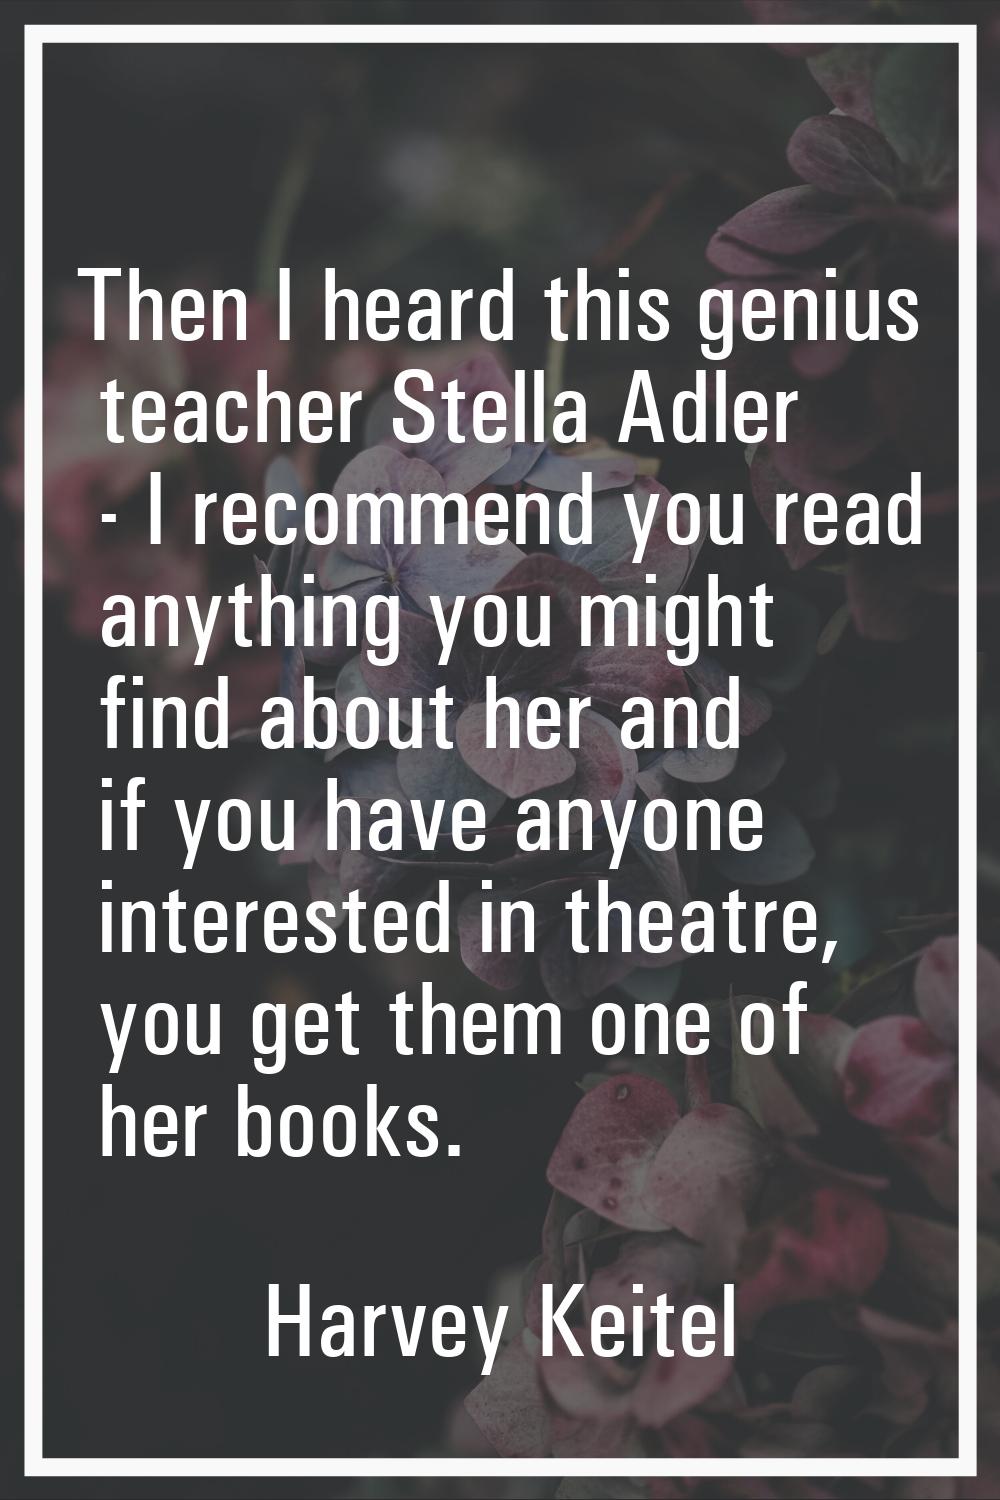 Then I heard this genius teacher Stella Adler - I recommend you read anything you might find about 